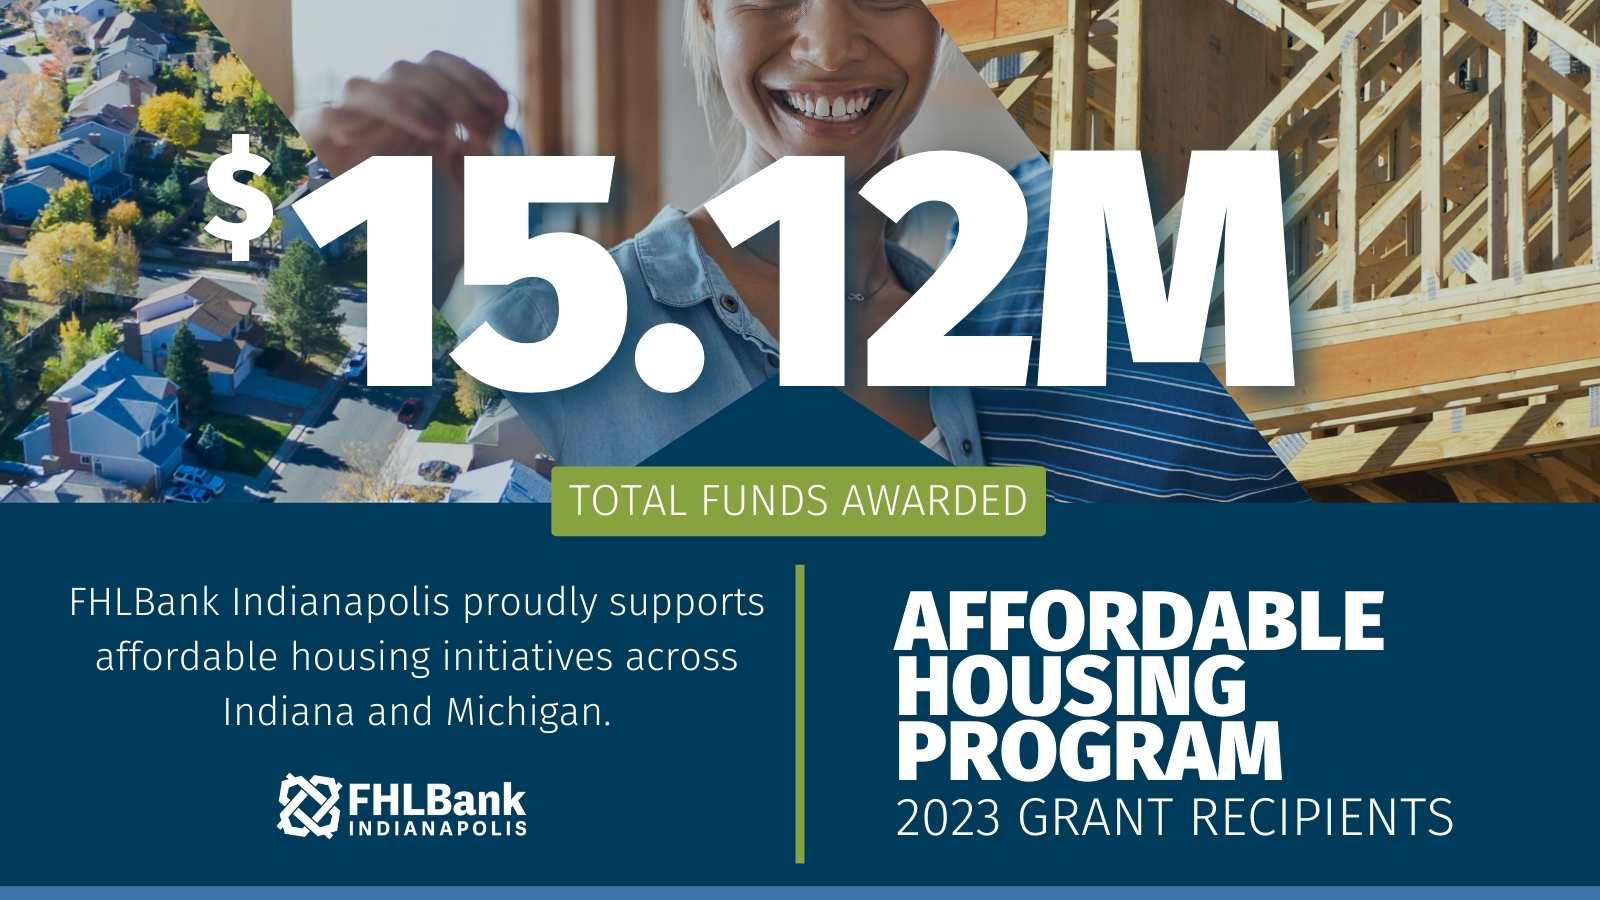 FHLBank Indianapolis awards $15.12 million in Affordable Housing Program grants